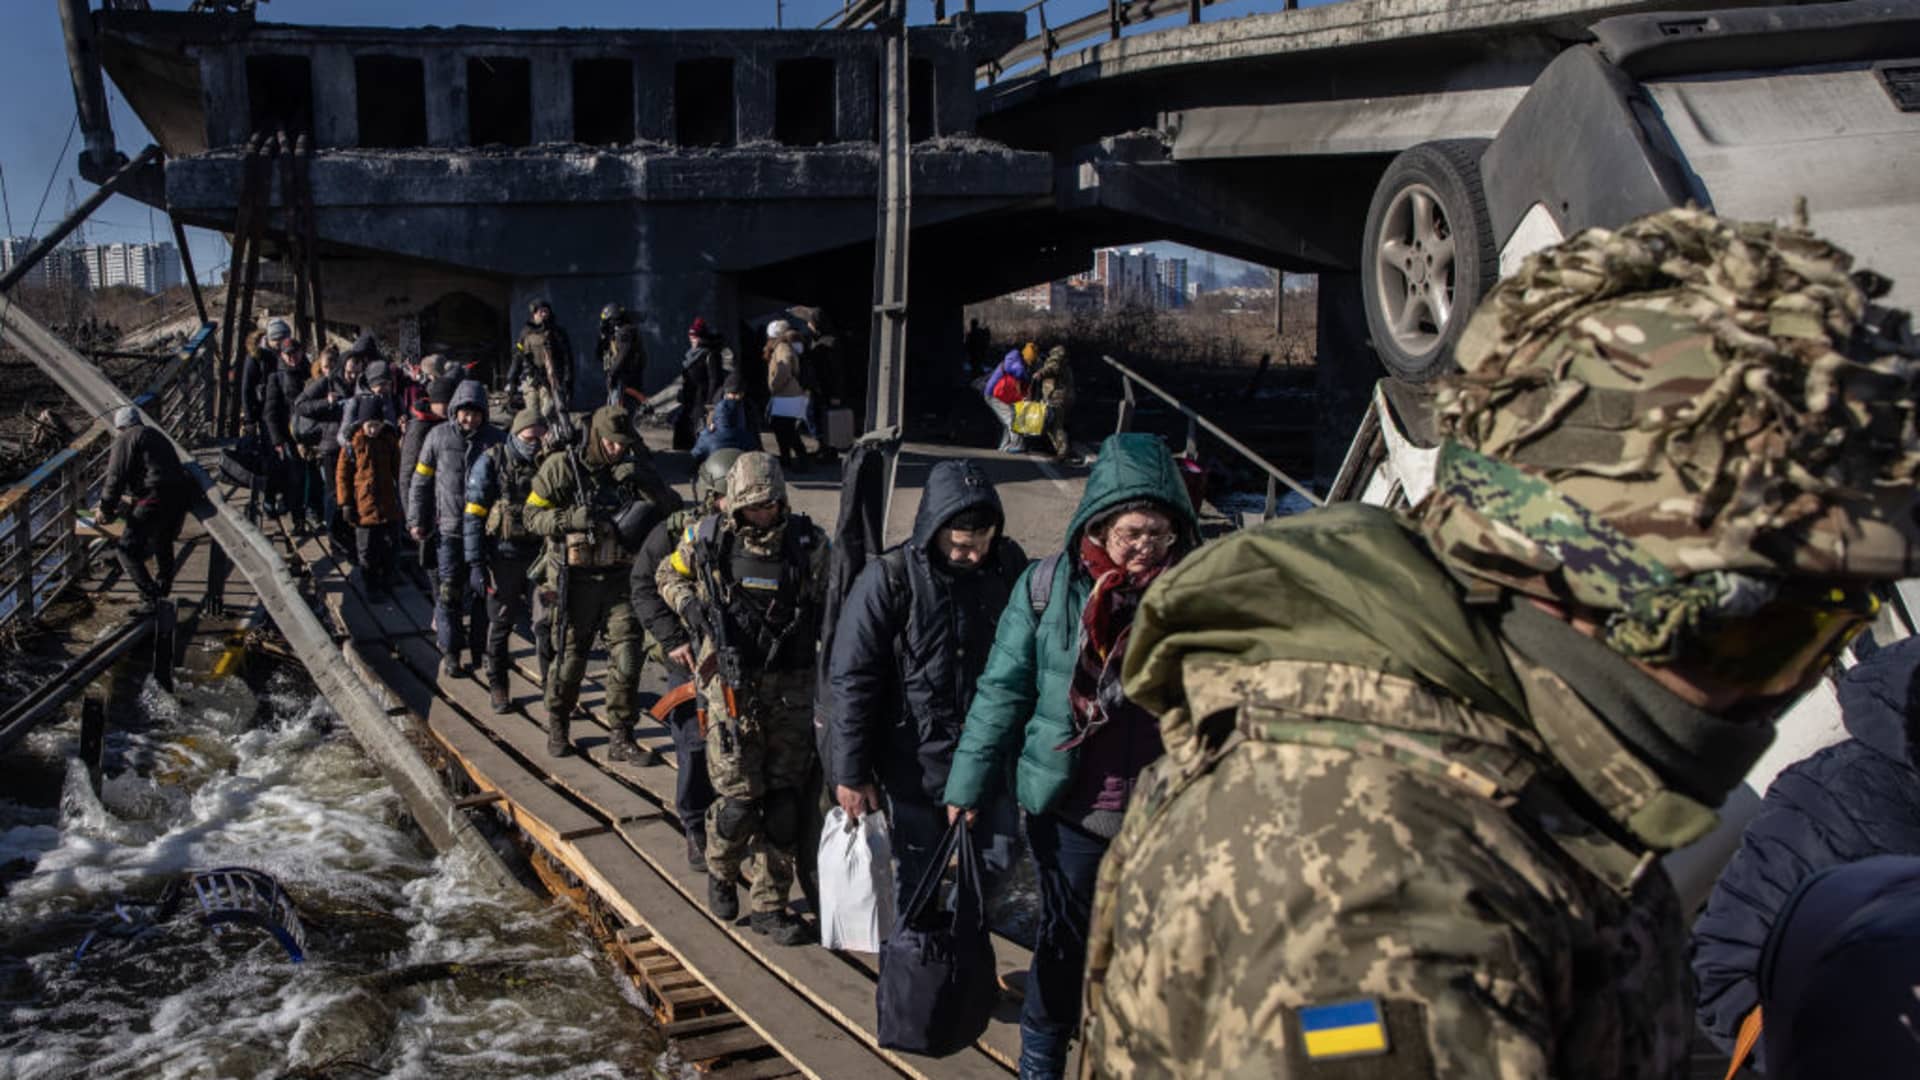 Residents of Irpin and Bucha flee fighting via a destroyed bridge on March 10, 2022 in Irpin, Ukraine. Irpin, a suburb northwest of Kyiv, had experienced days of sustained shelling by Russian forces advancing toward the capital. Well over two million people have fled Ukraine since Russia launched its attack on February 24.